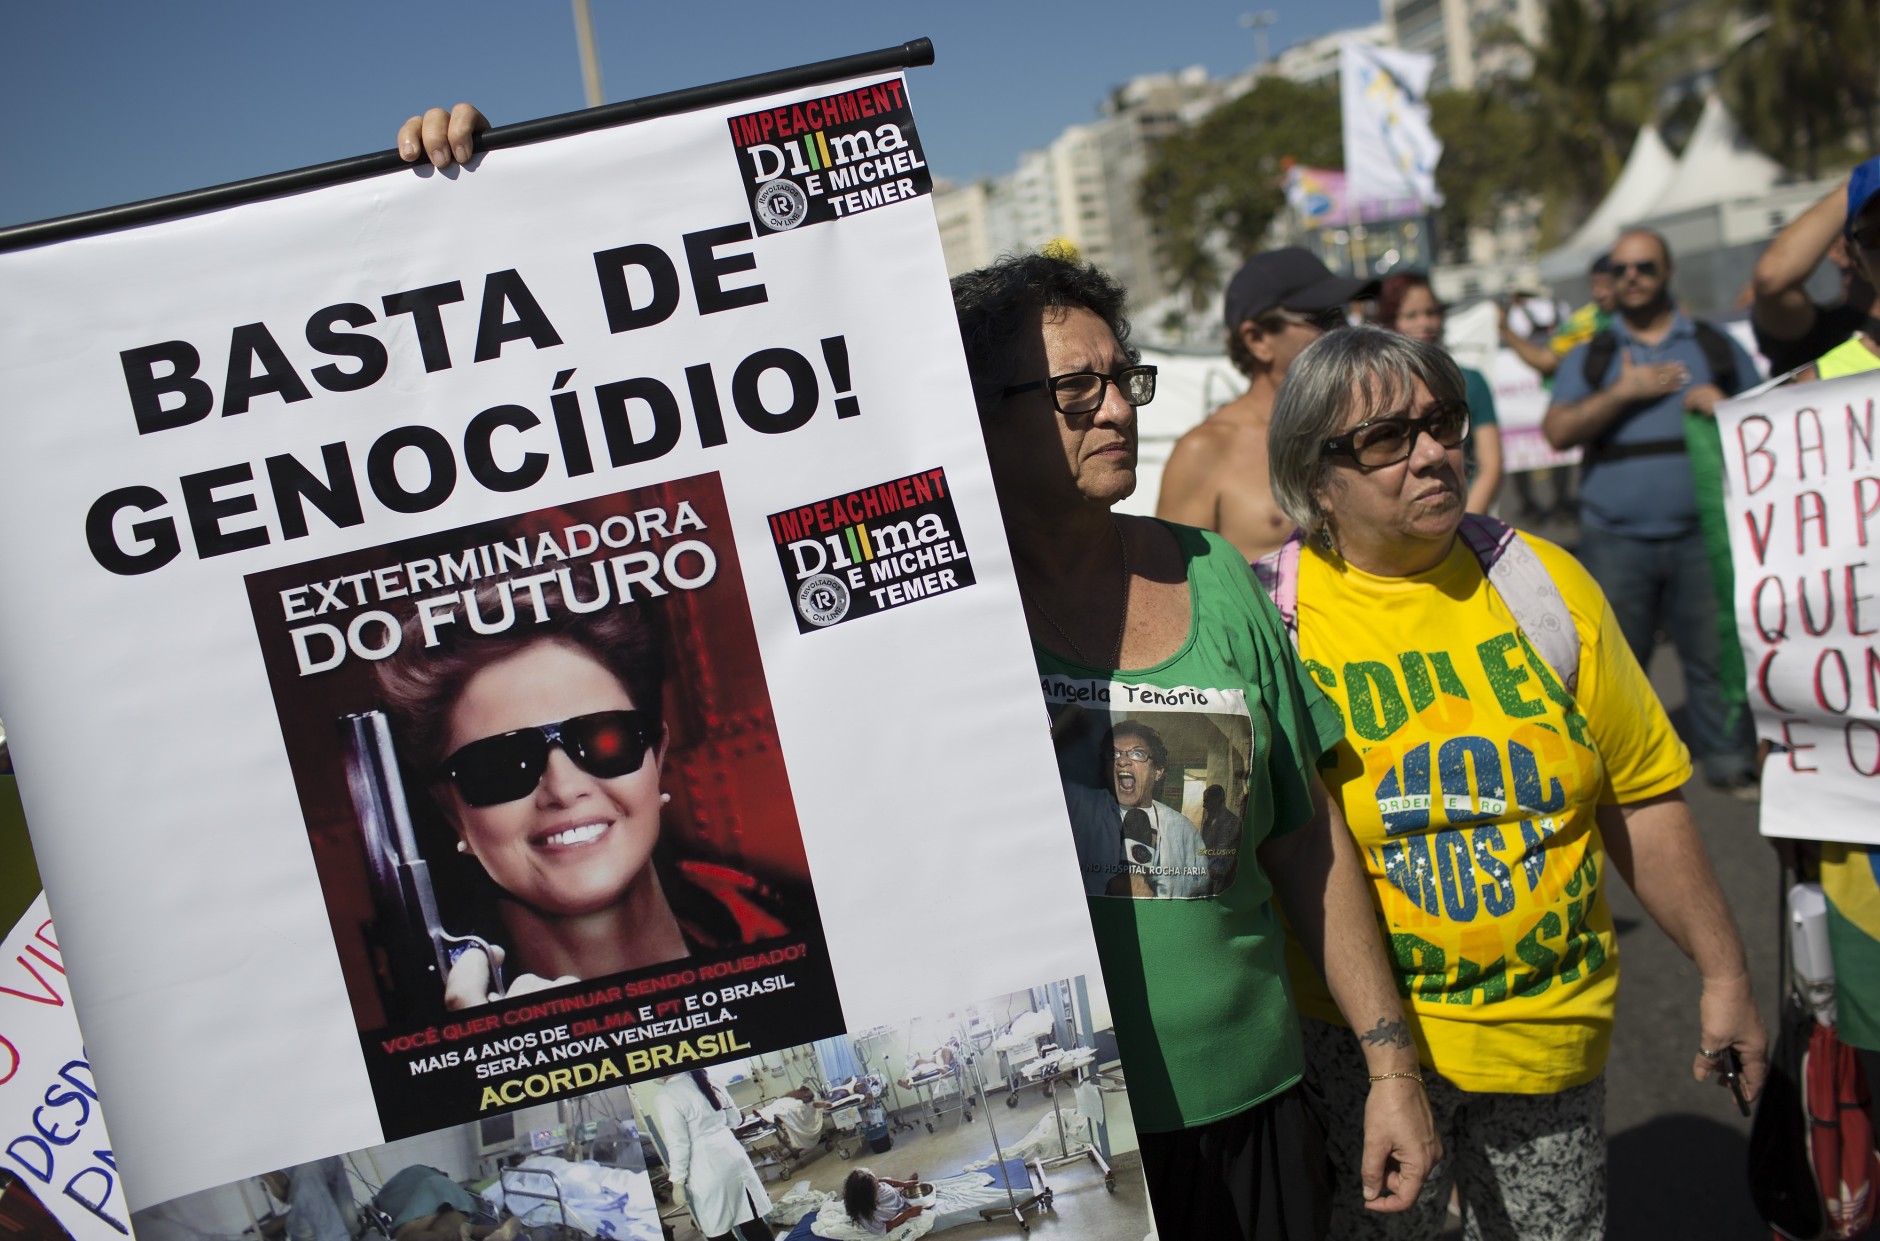 A woman holds a sign that reads in Portuguese "Enough genocide!" and "Exterminator of the Future" with an image depicting Brazil's President Dilma Rousseff holding a gun, during a protest demanding the her impeachment in Rio de Janeiro, Brazil, Sunday, Aug. 16, 2015. Demonstrators are taking to the streets across Brazil for a day of nationwide anti-government protests. President Rousseff's second term in office has been shaken by a snowballing corruption scandal involving politicians from her Workers Party, as well as a spluttering economy, spiraling currency and rising inflation, making her popularity ratings fall to historic lows. (AP Photo/Leo Correa)